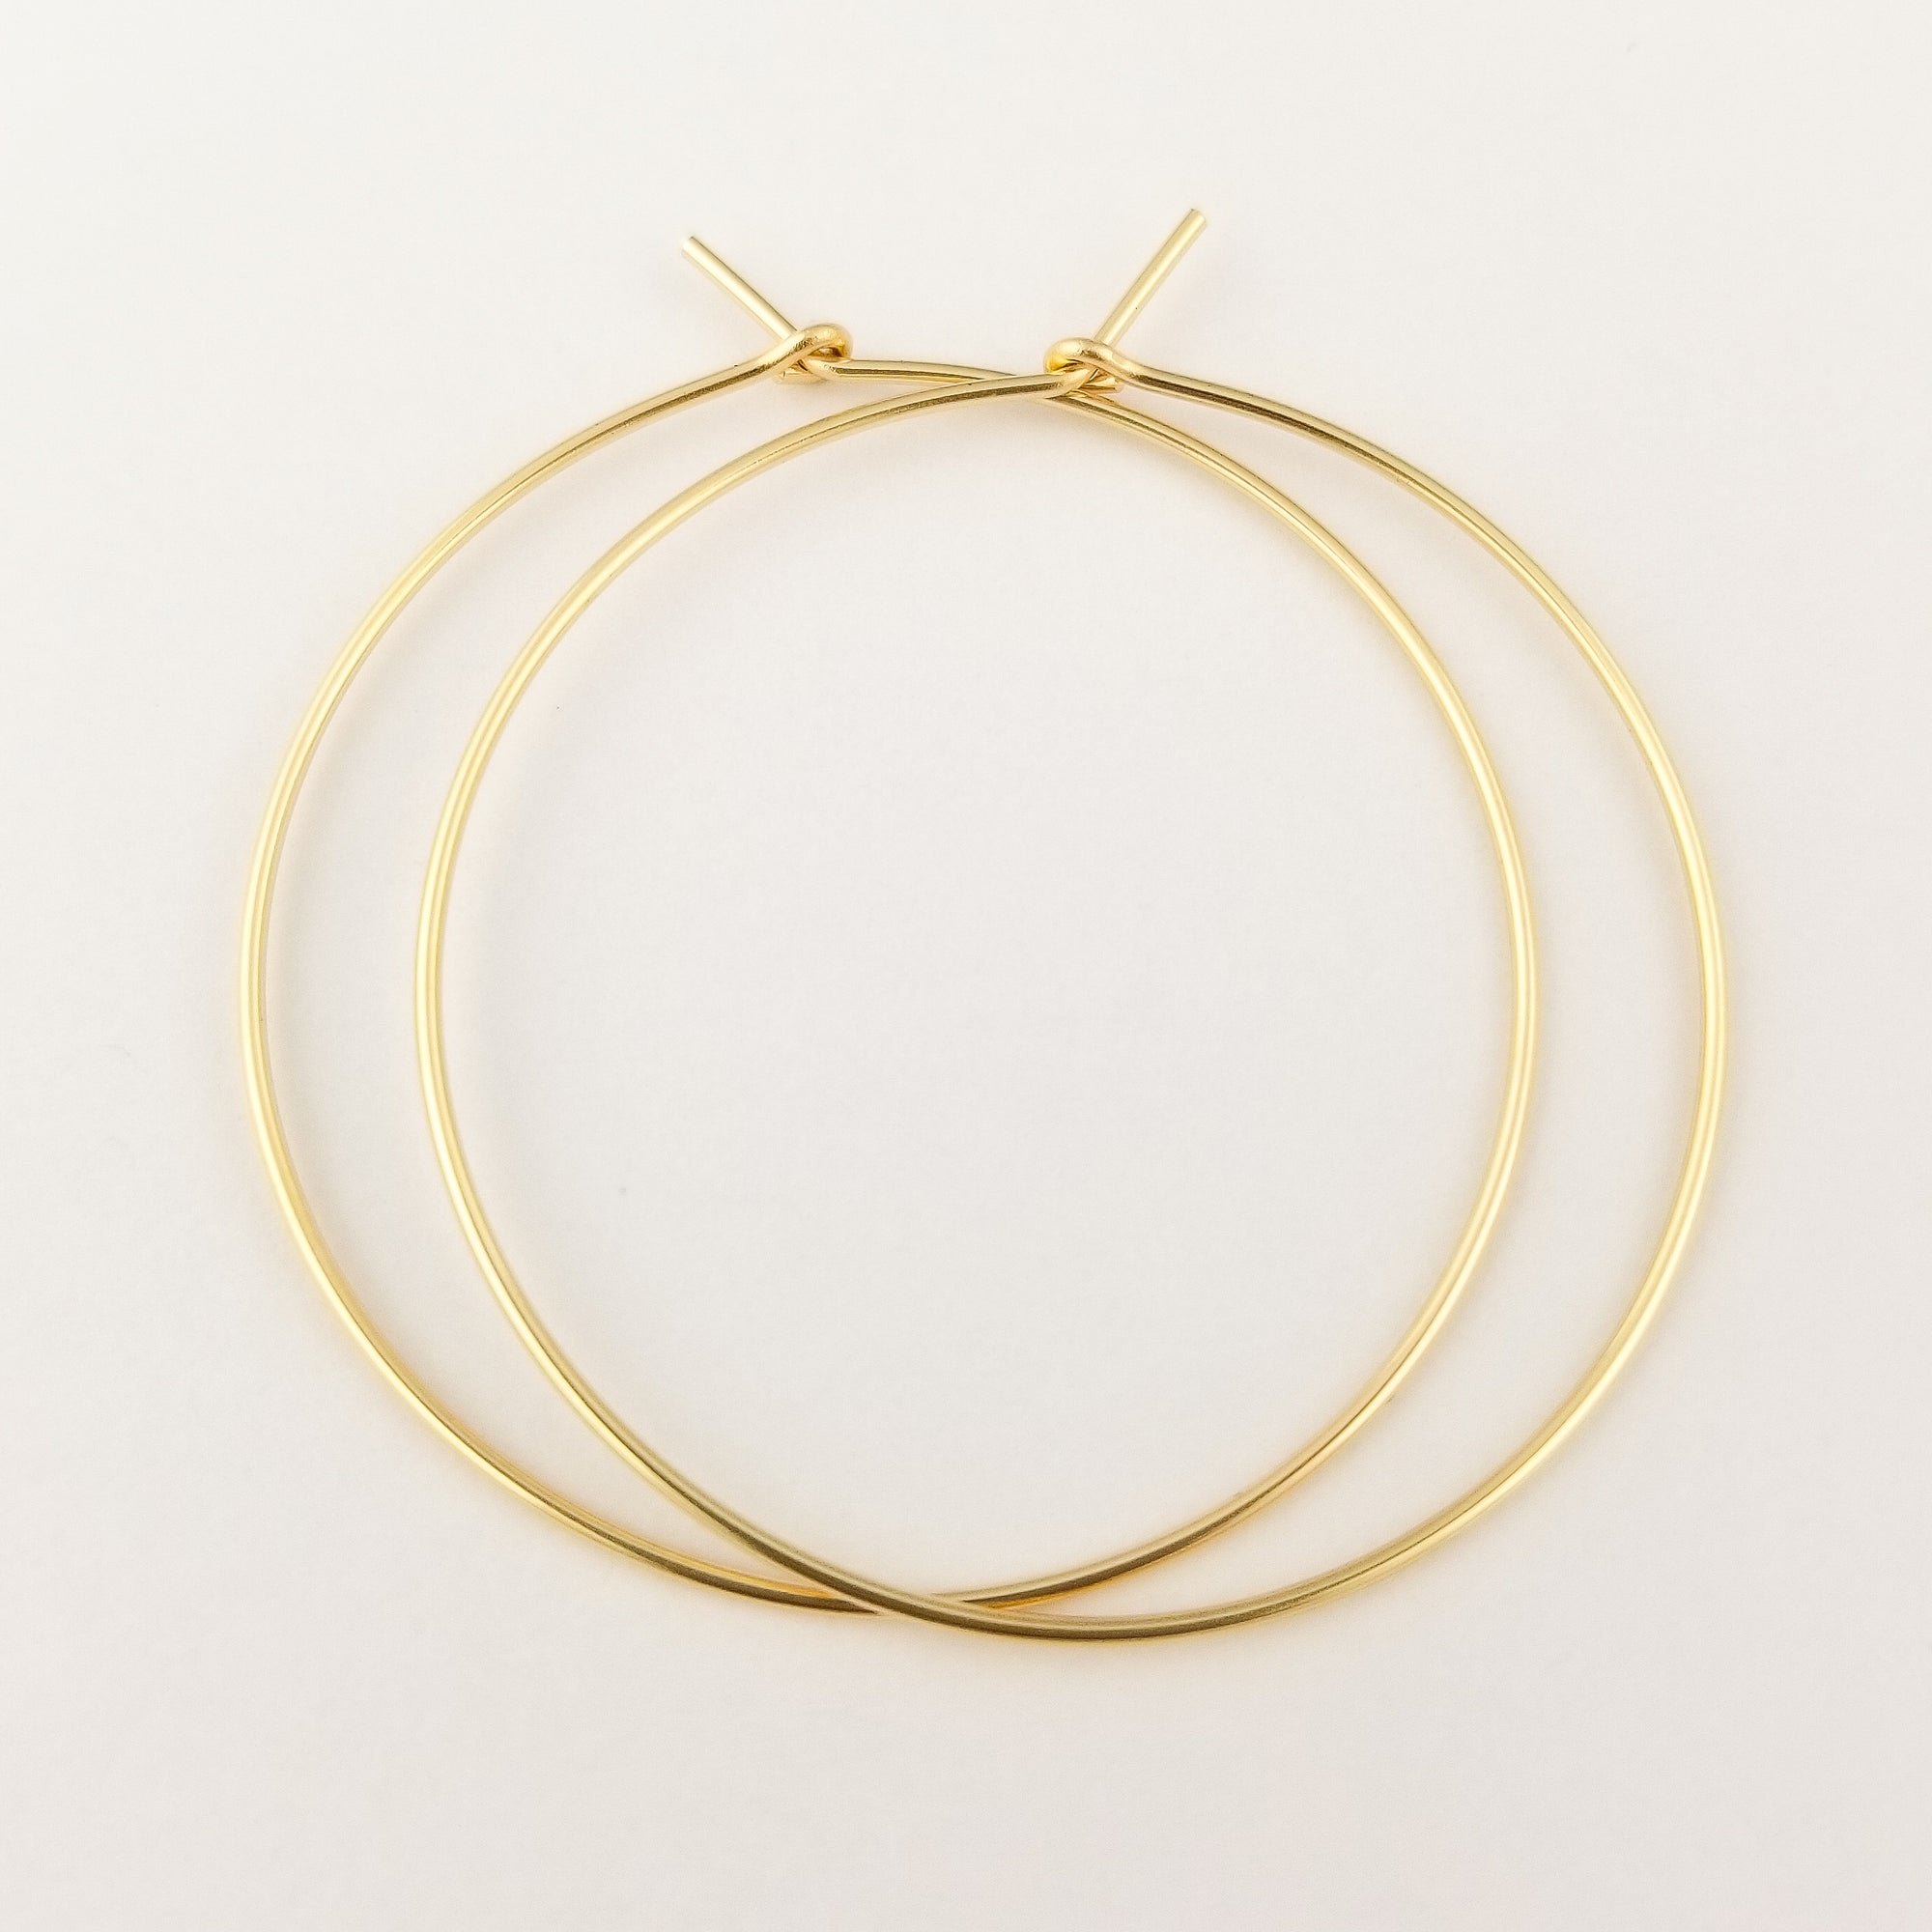 Thin Solid Gold Hoop Earrings Handmade with 14 Karat Yellow Gold Held in Fingers